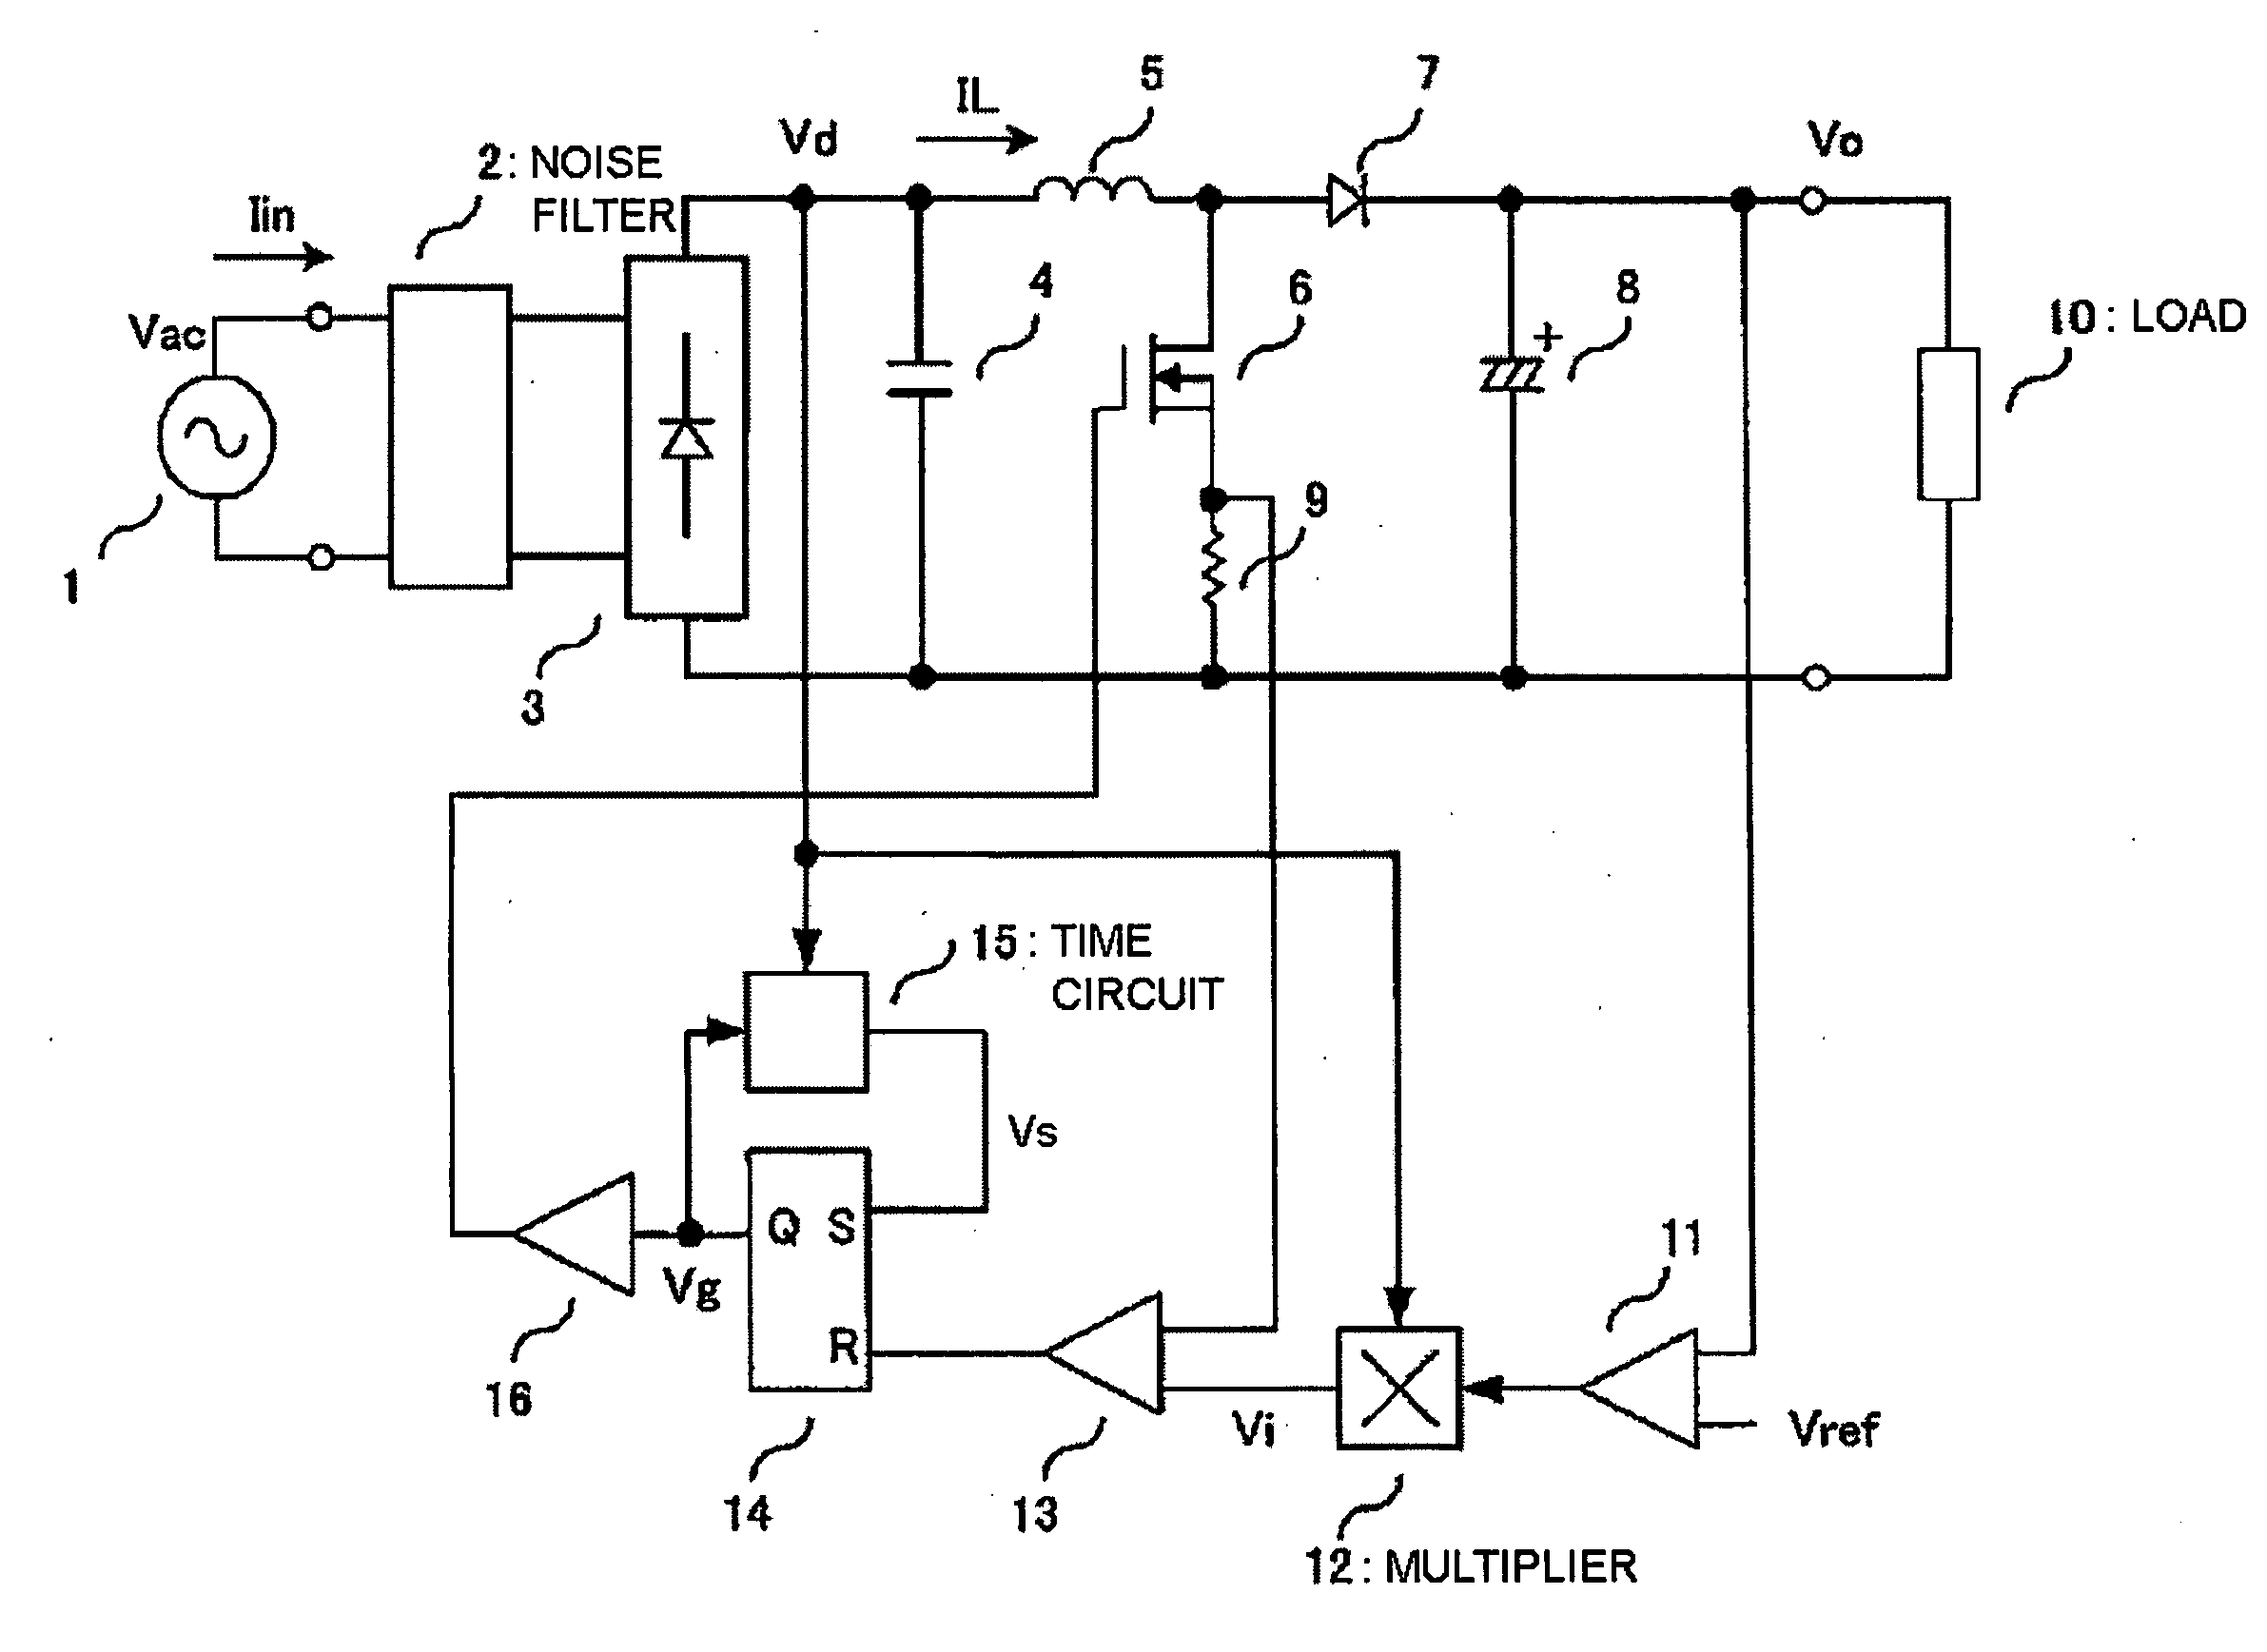 Control system of a power factor correction circuit